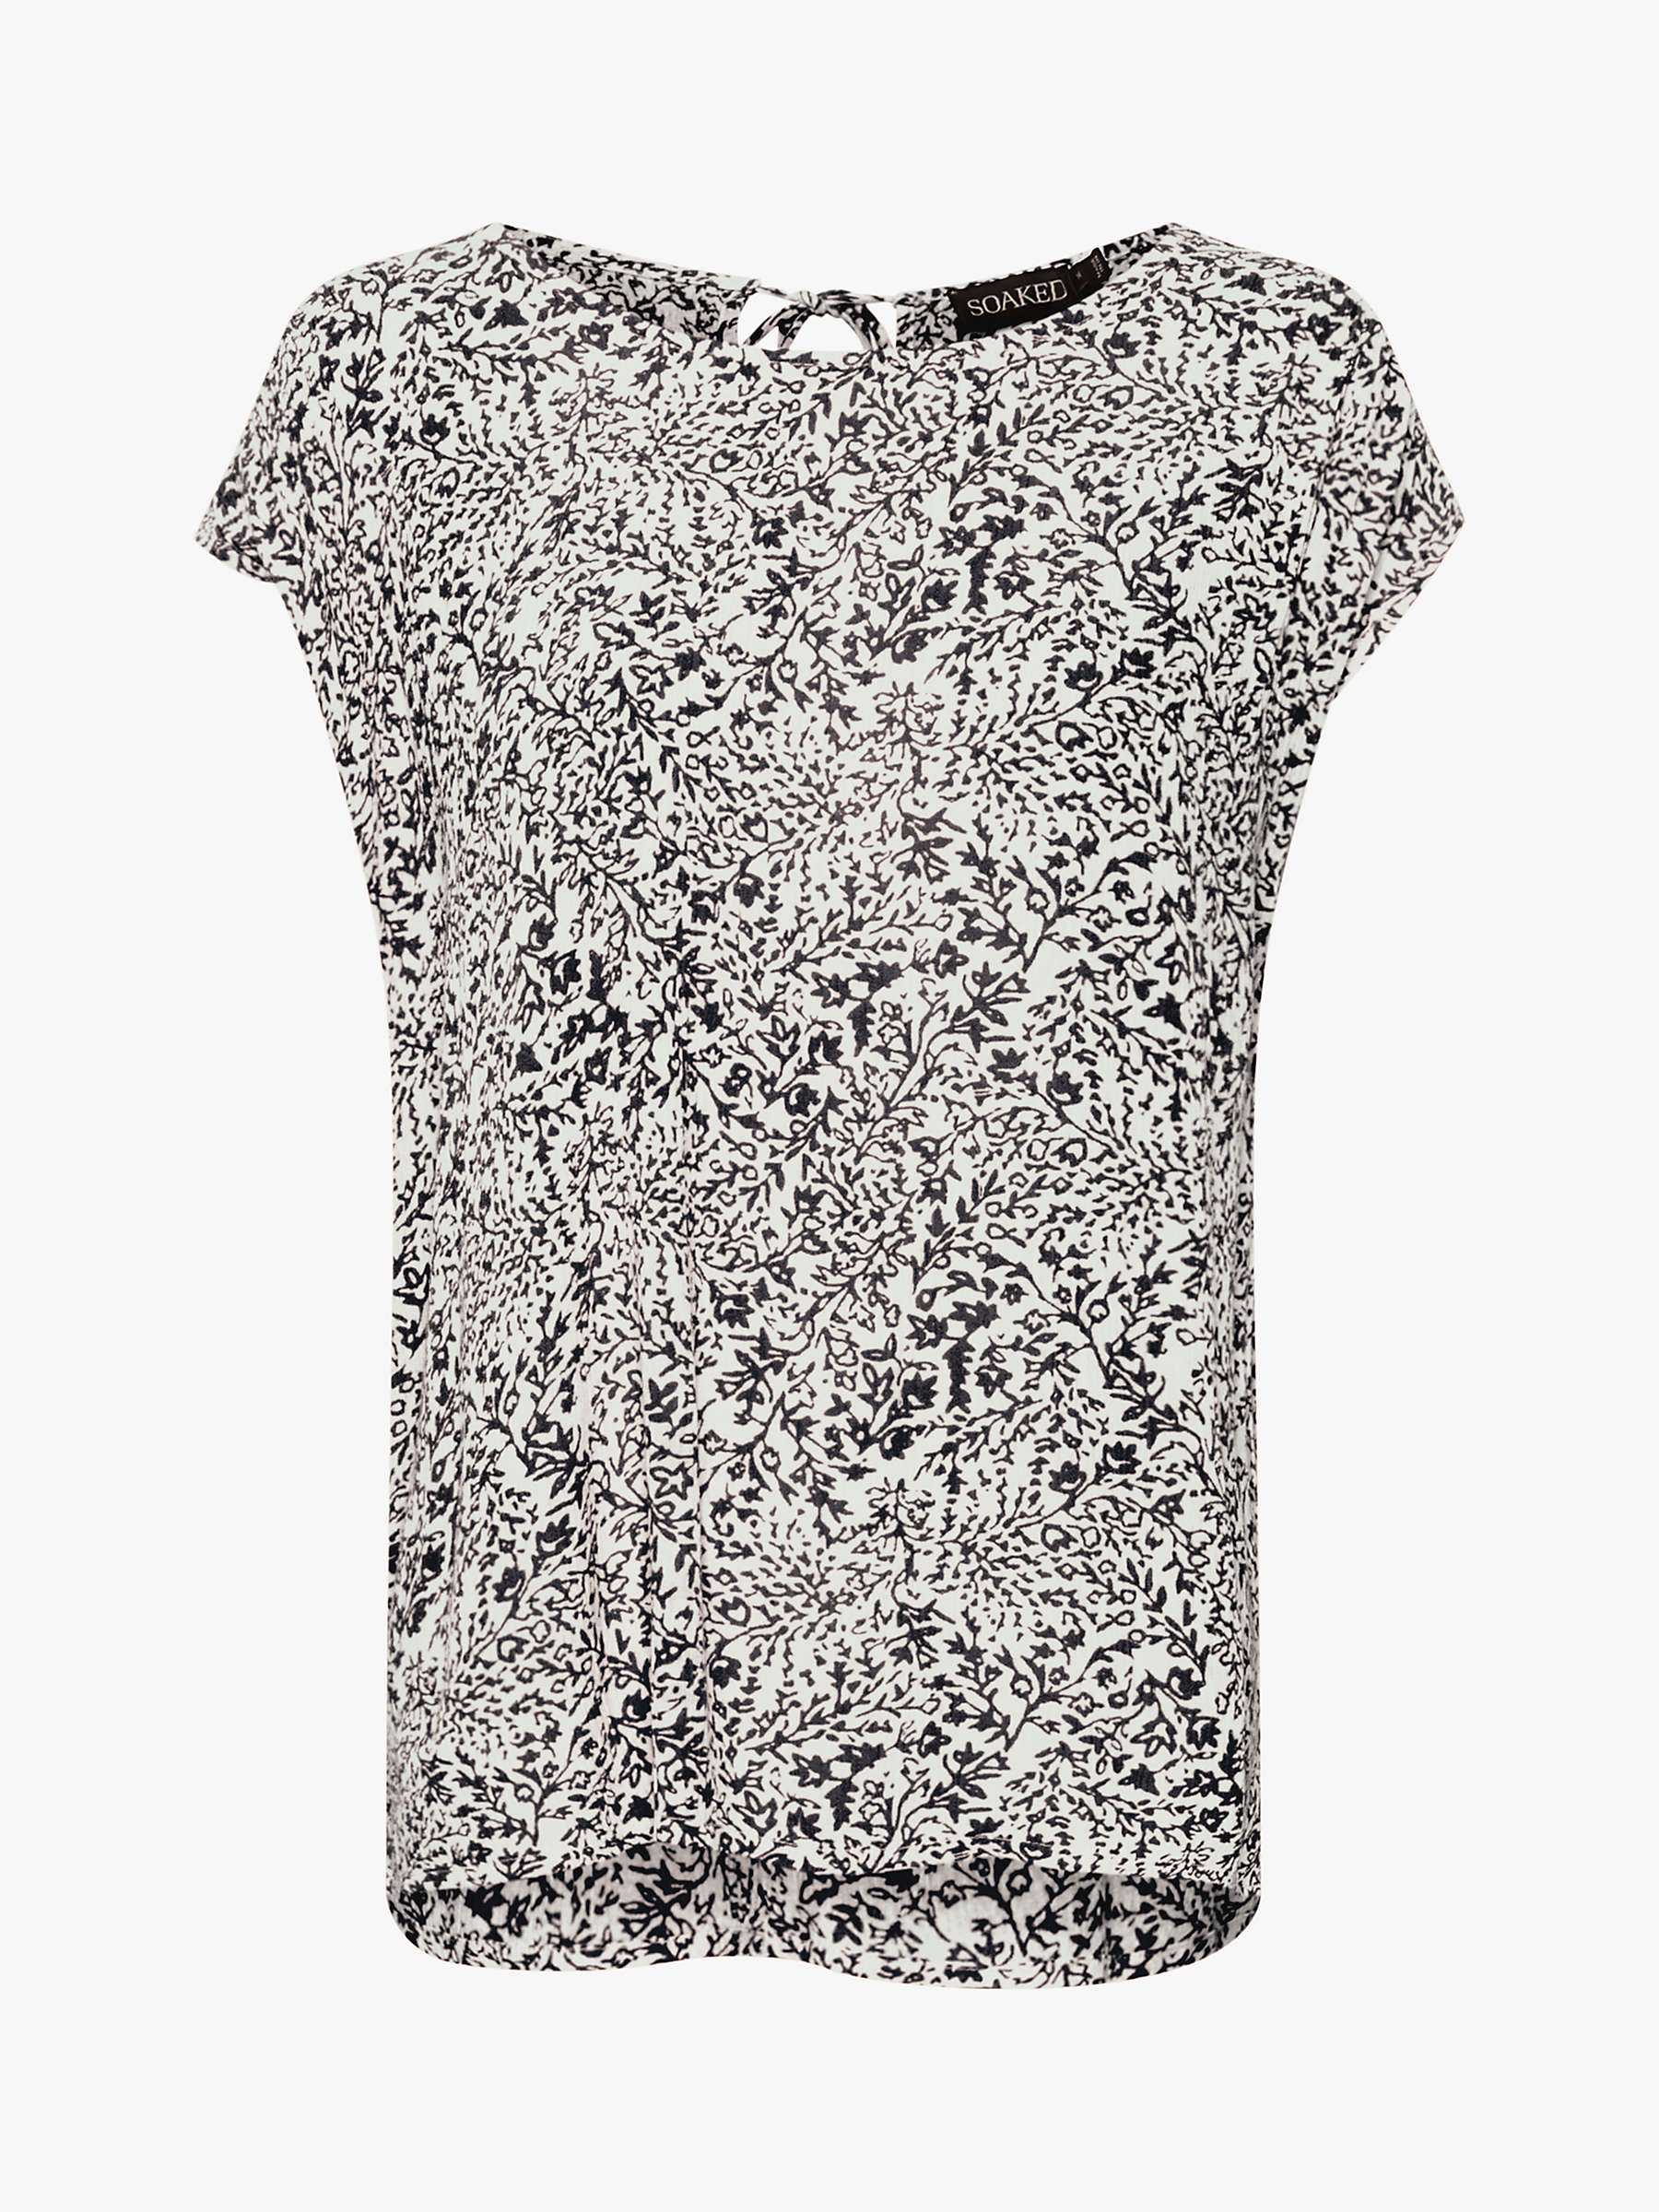 Buy Soaked In Luxury Zaya Boat Neck Relaxed Fit Top Online at johnlewis.com